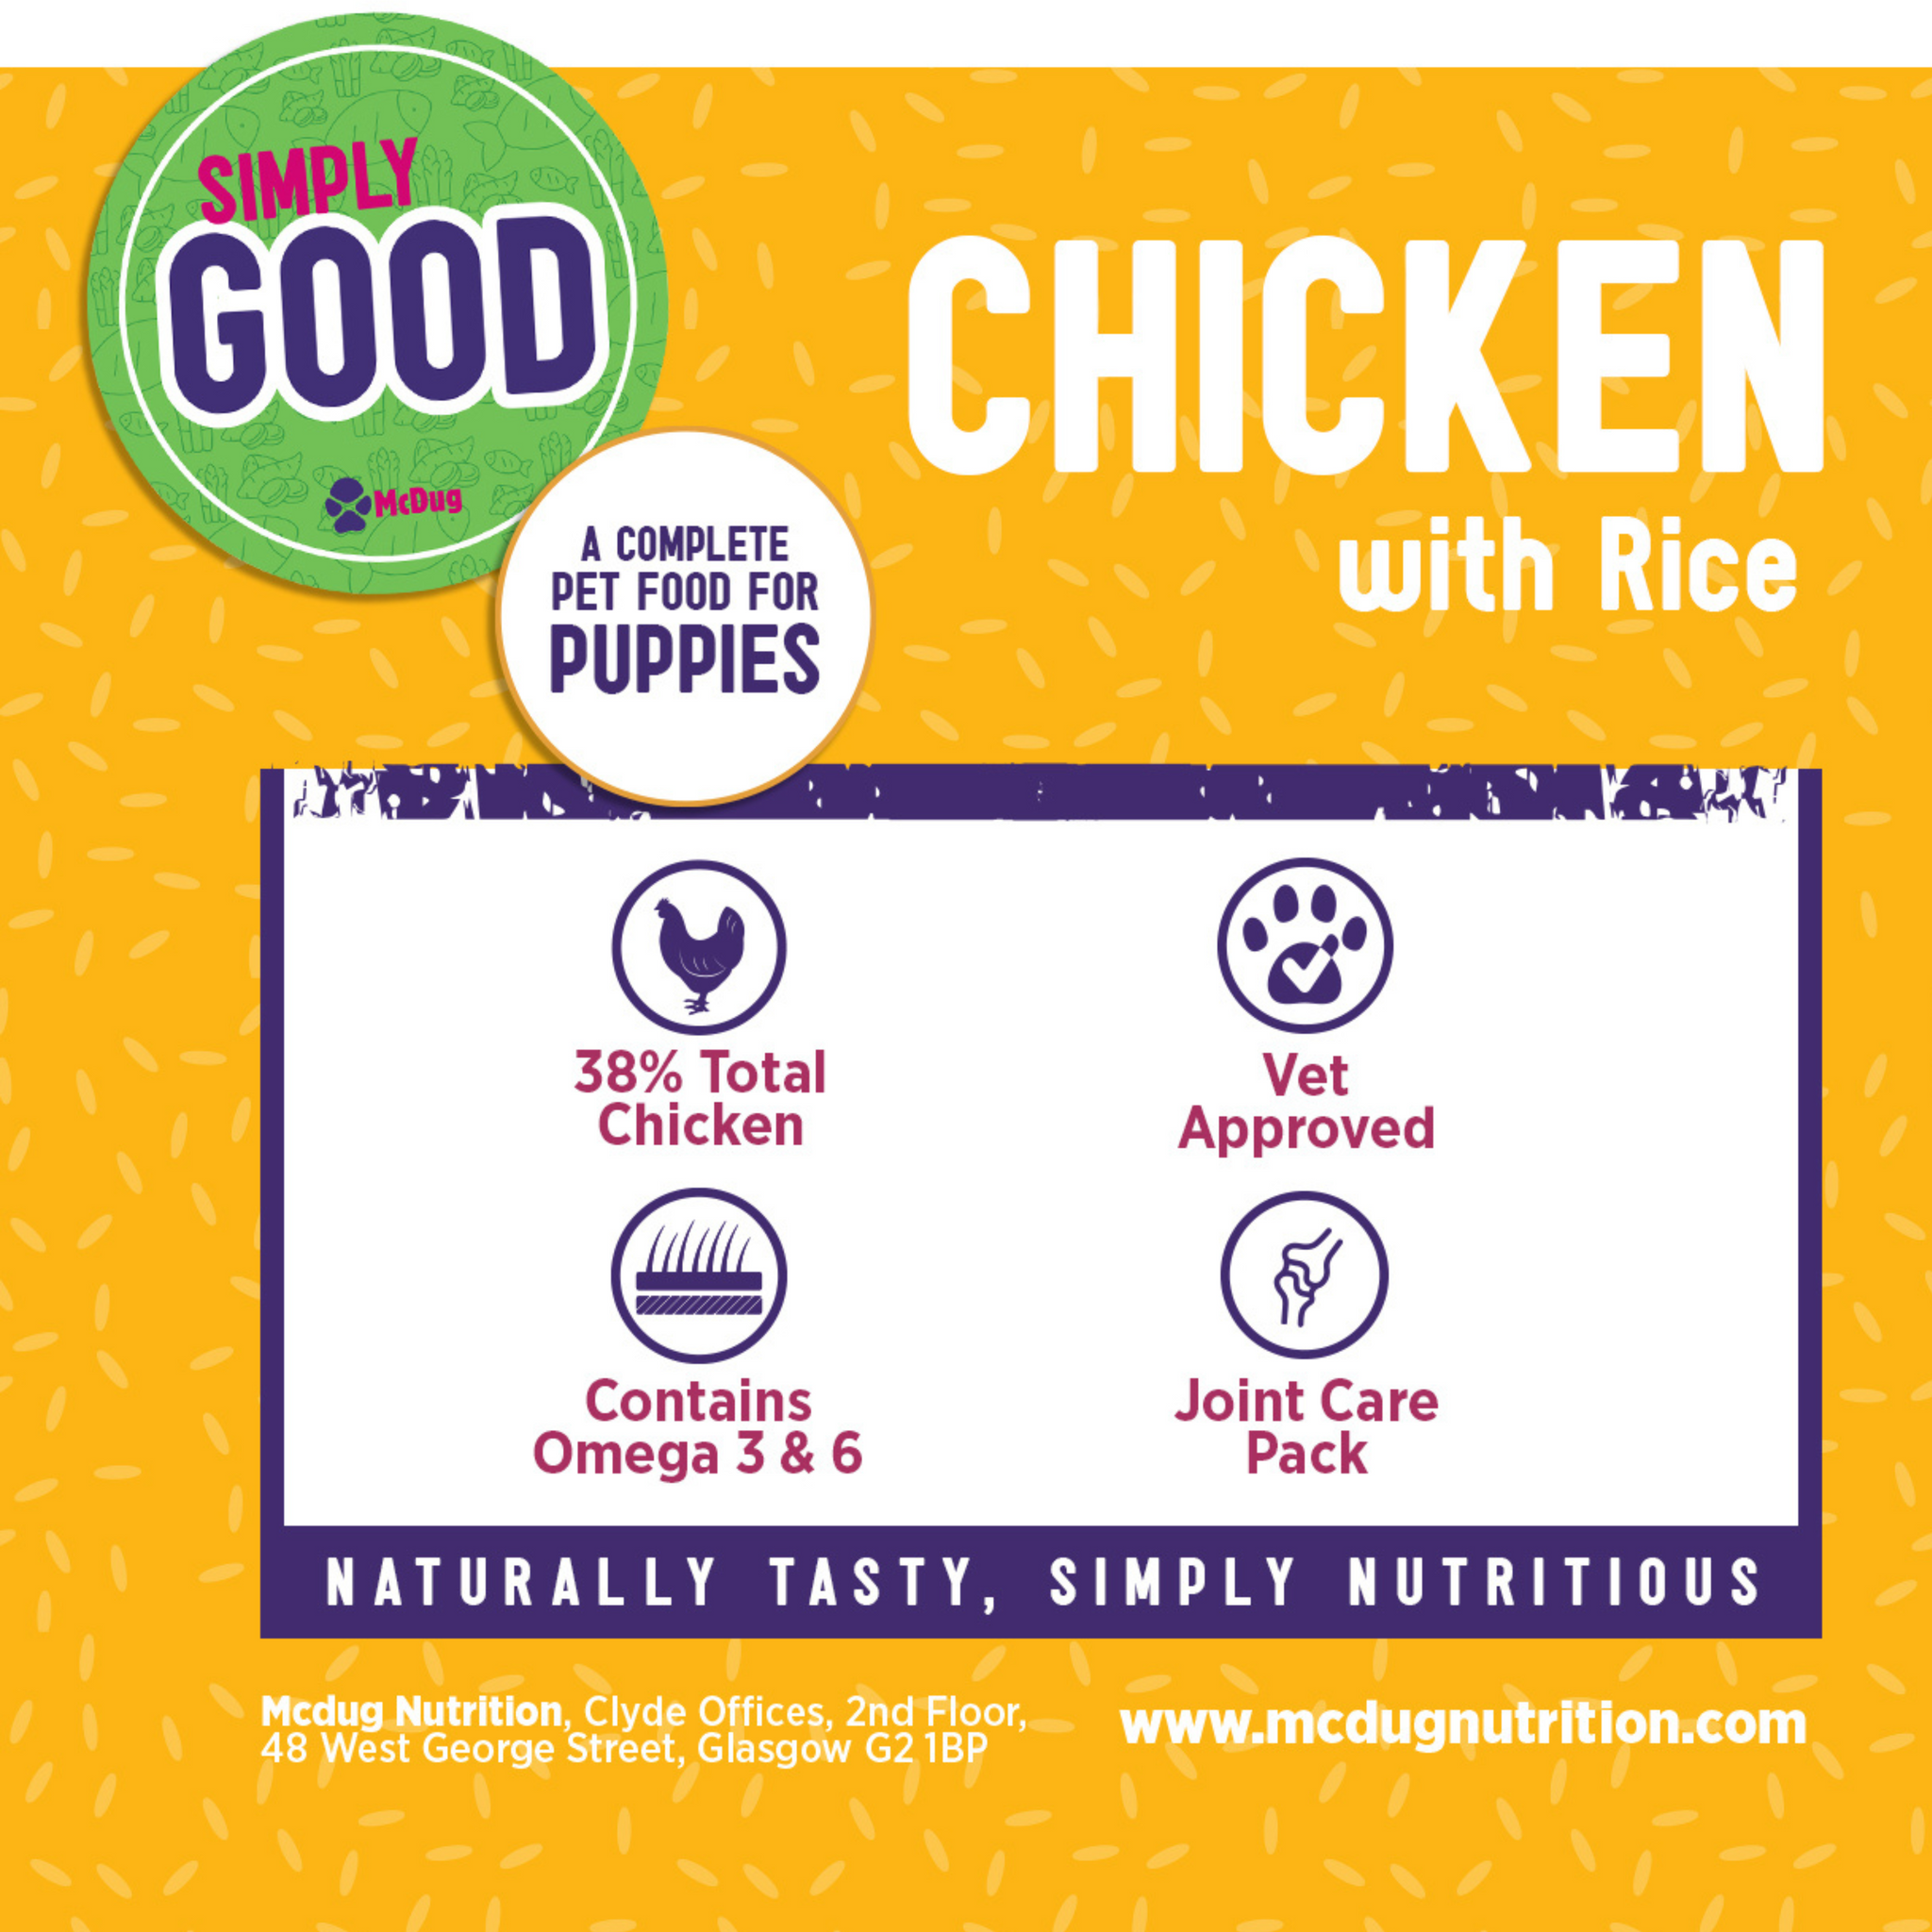 Simply Good Chicken and Rice (Puppy)